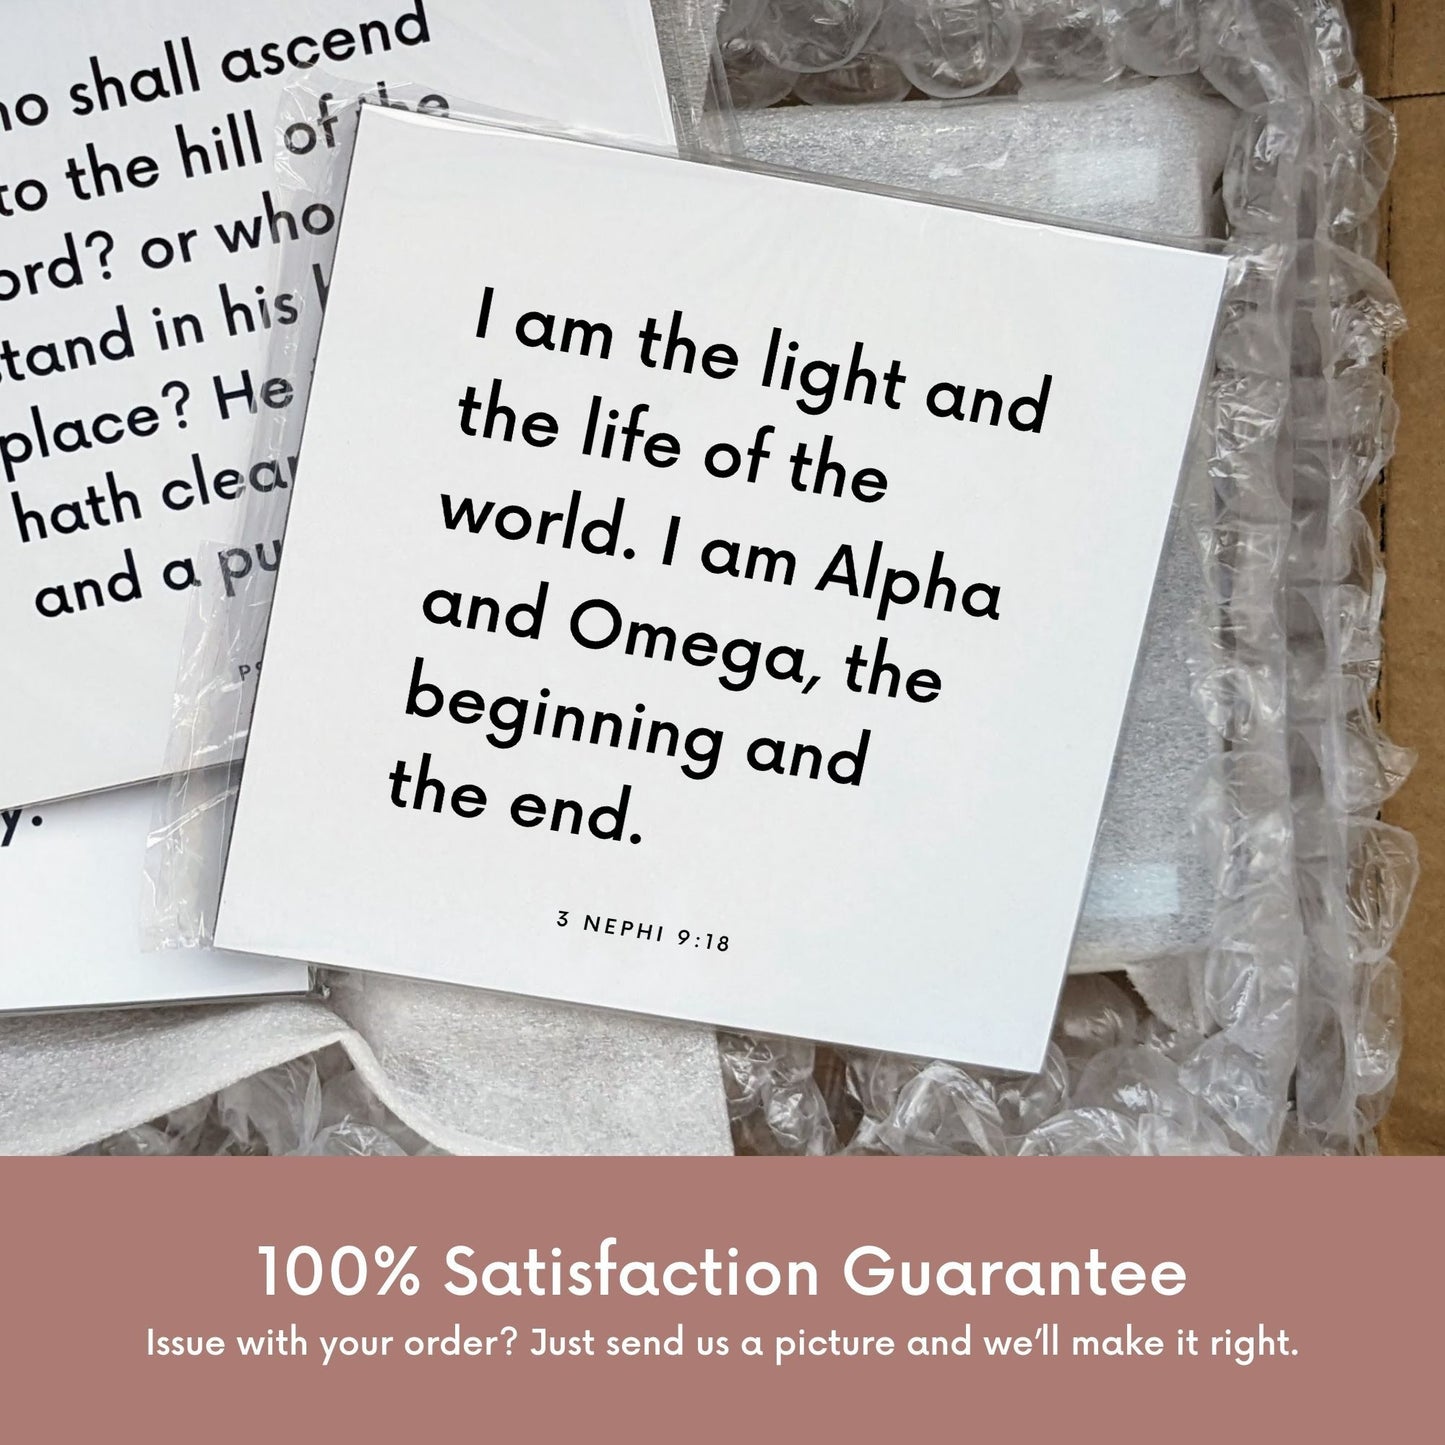 Shipping materials for scripture tile of 3 Nephi 9:18  - "I am Alpha and Omega, the beginning and the end"